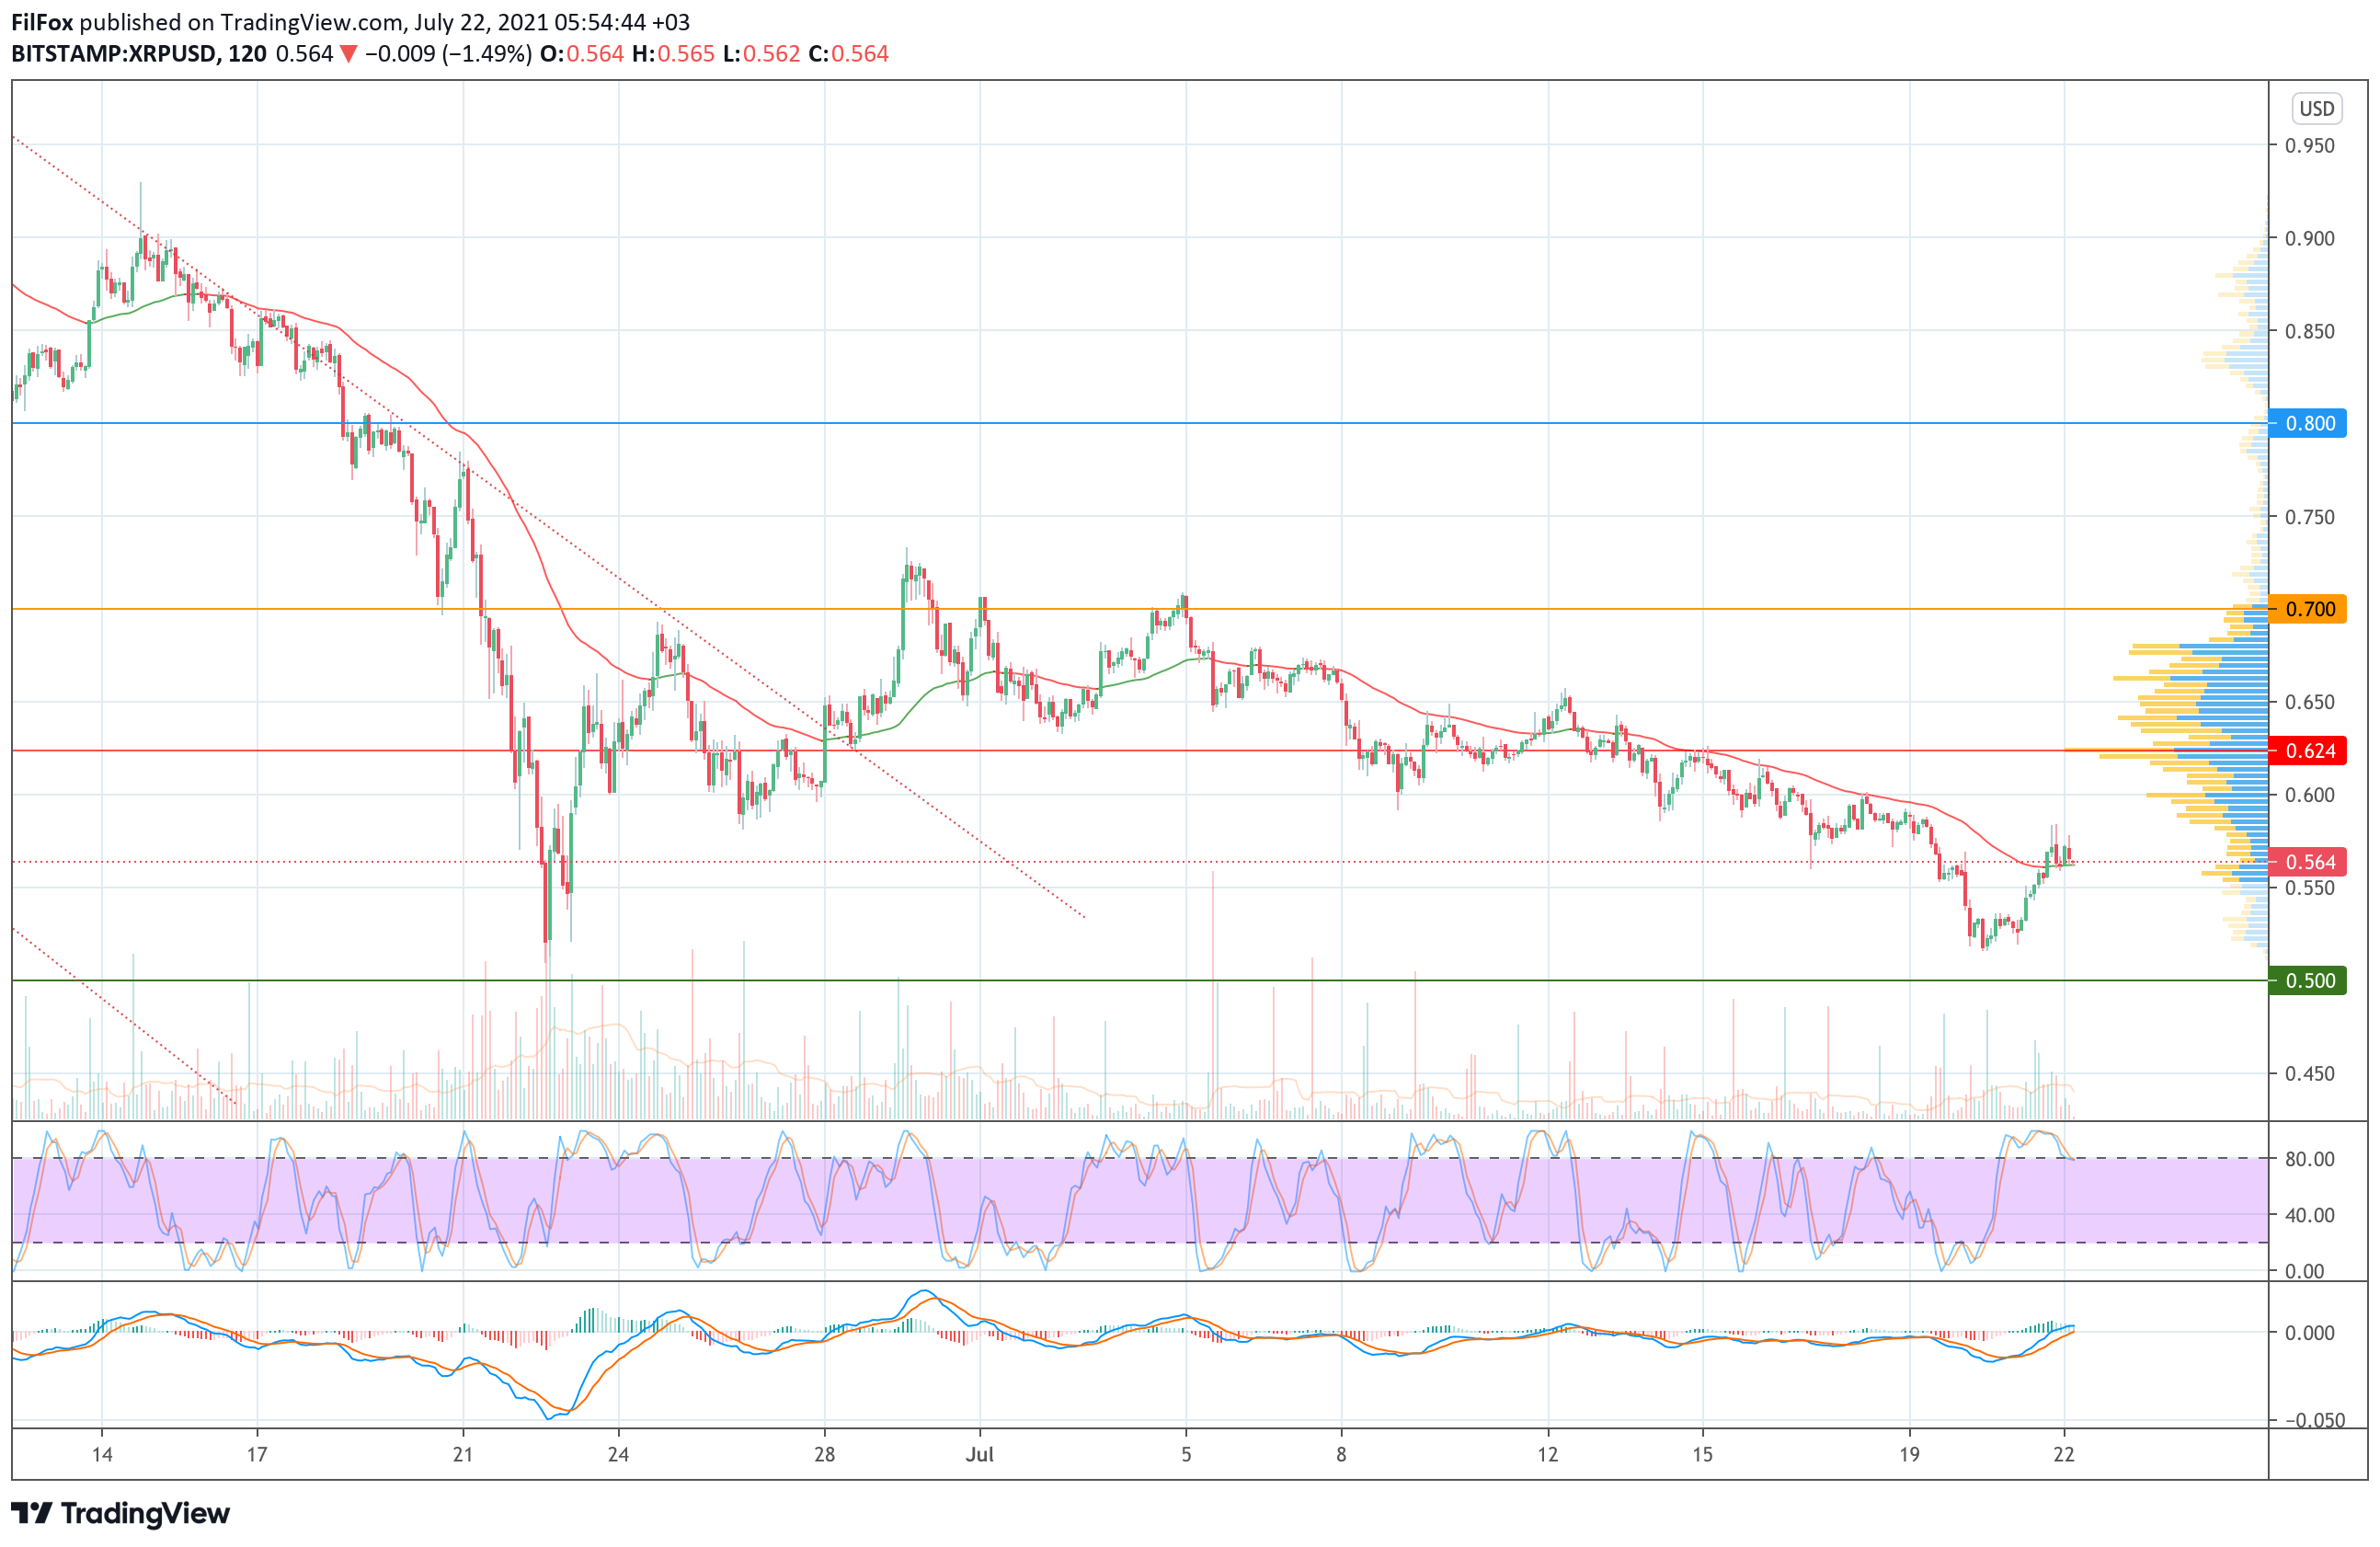 Analysis of prices for Bitcoin, Ethereum, XRP for 07/22/2021